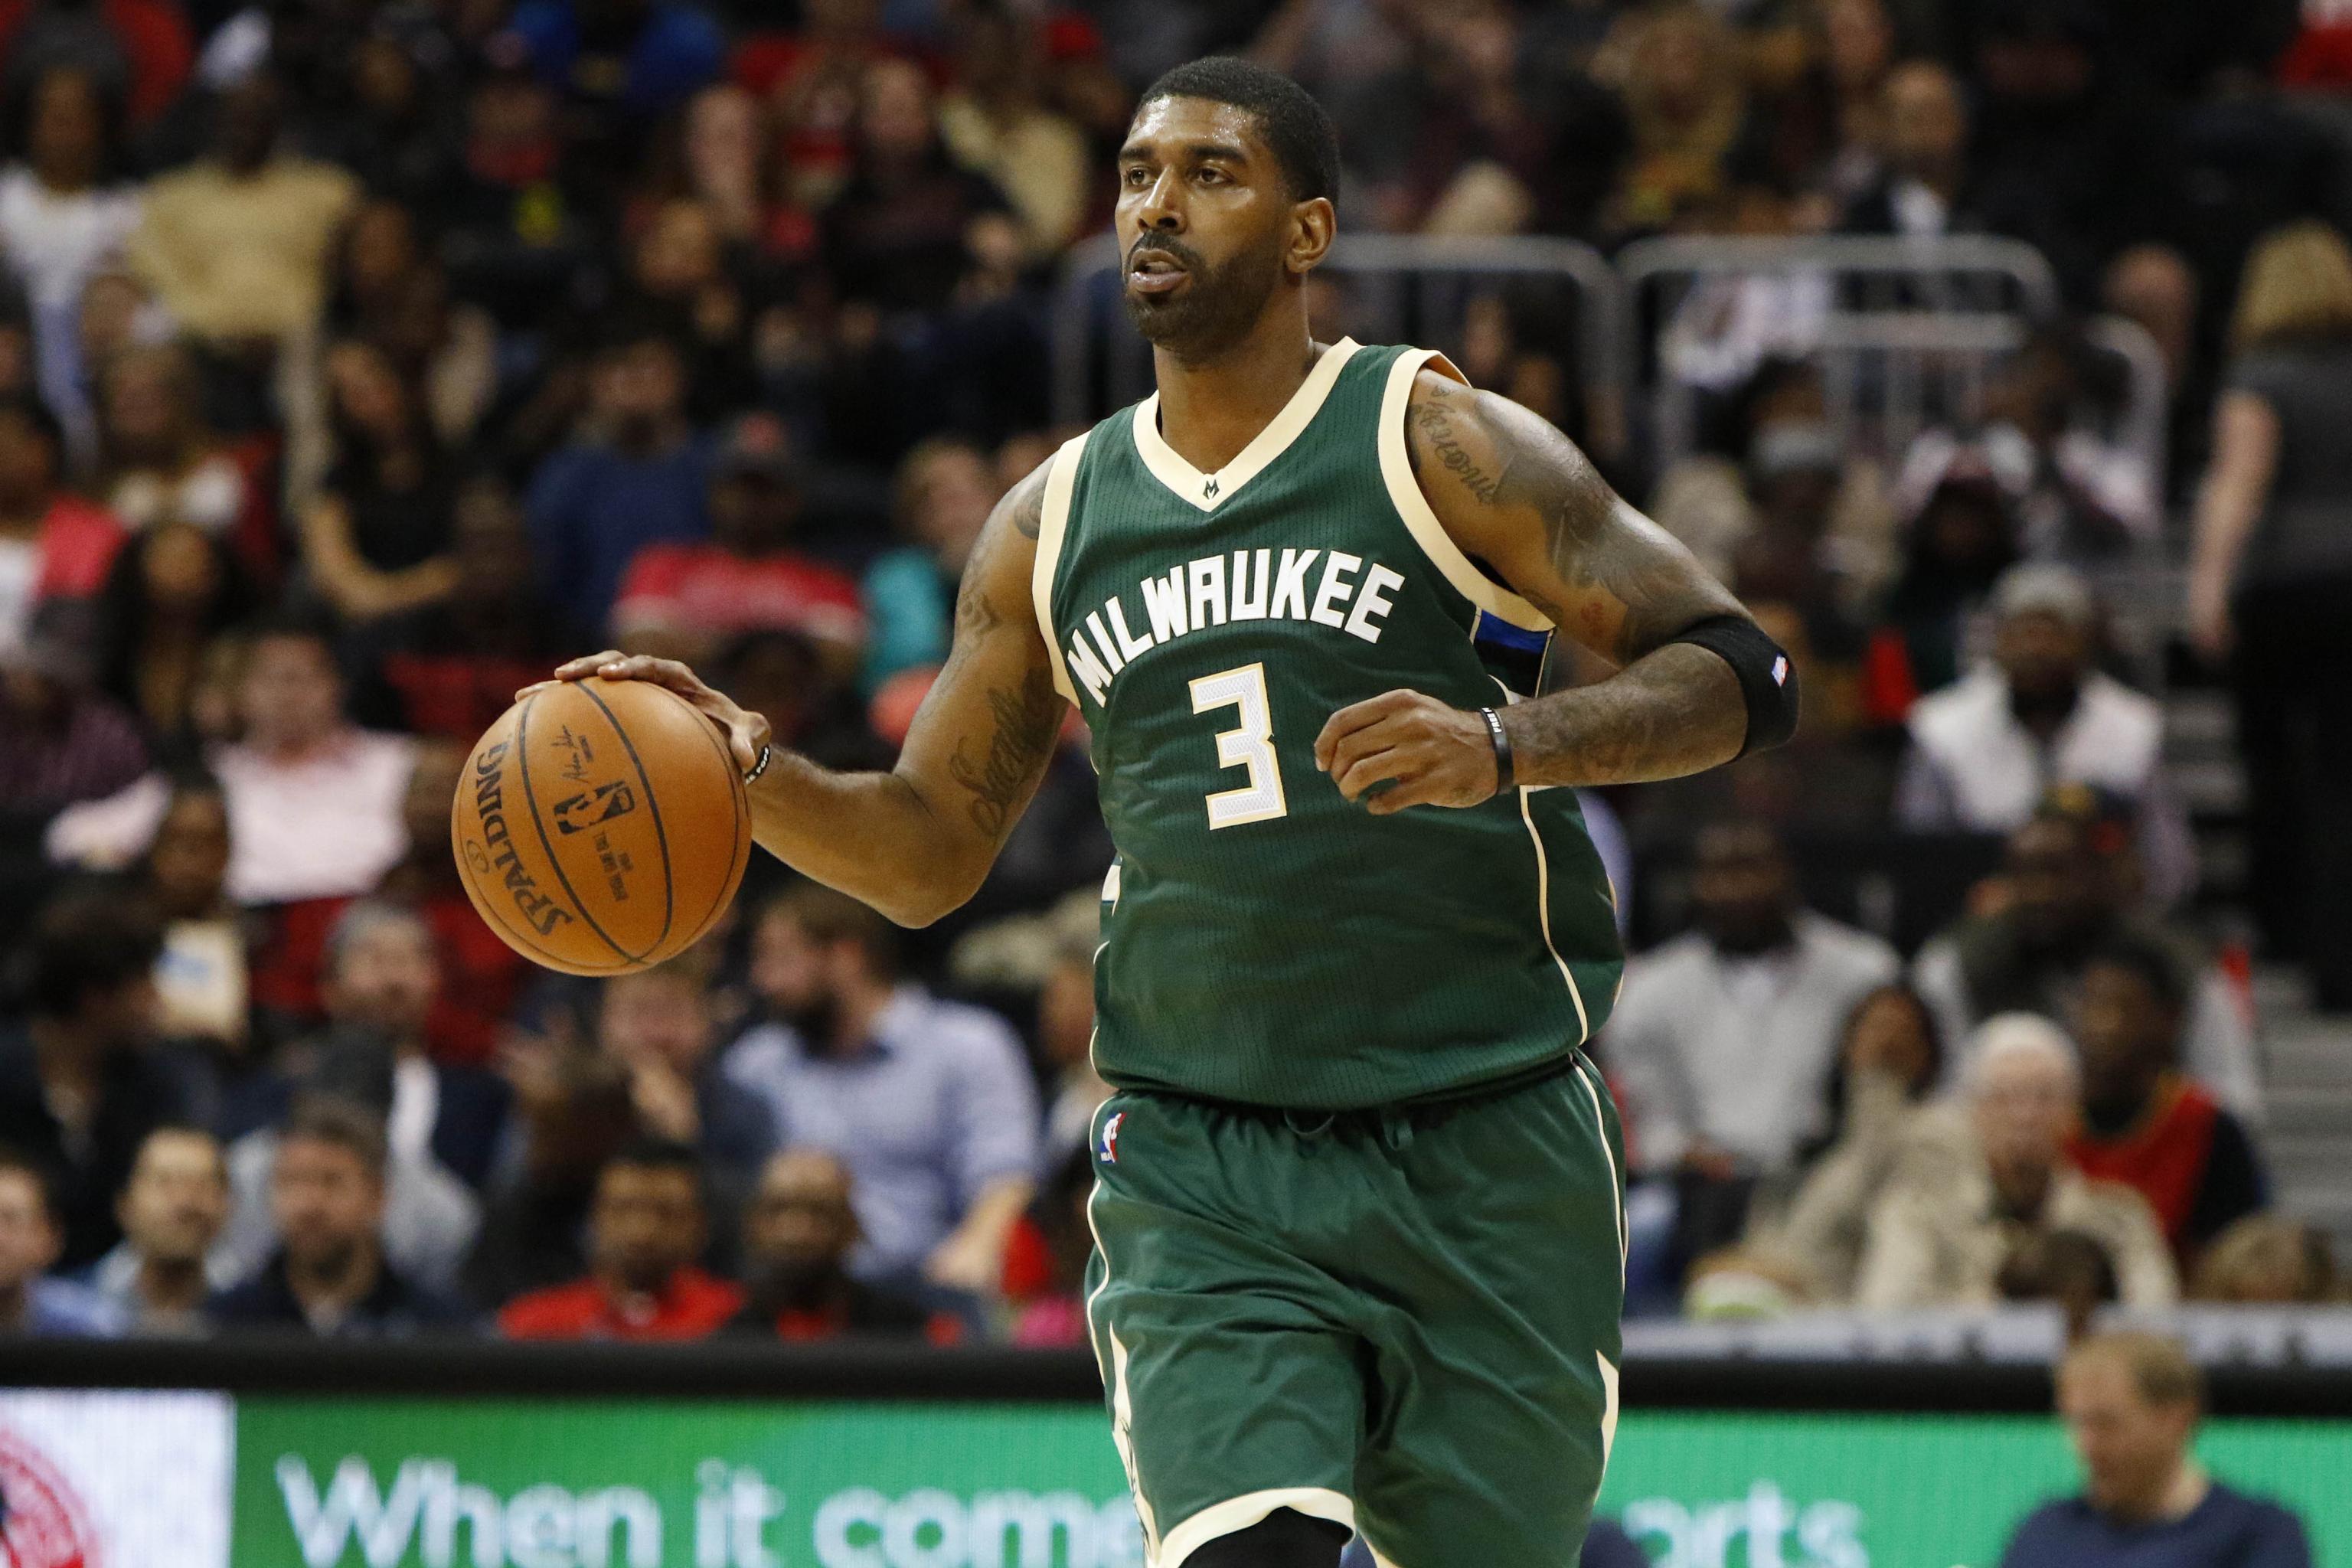 NBA suspends O.J. Mayo 10 games for positive test